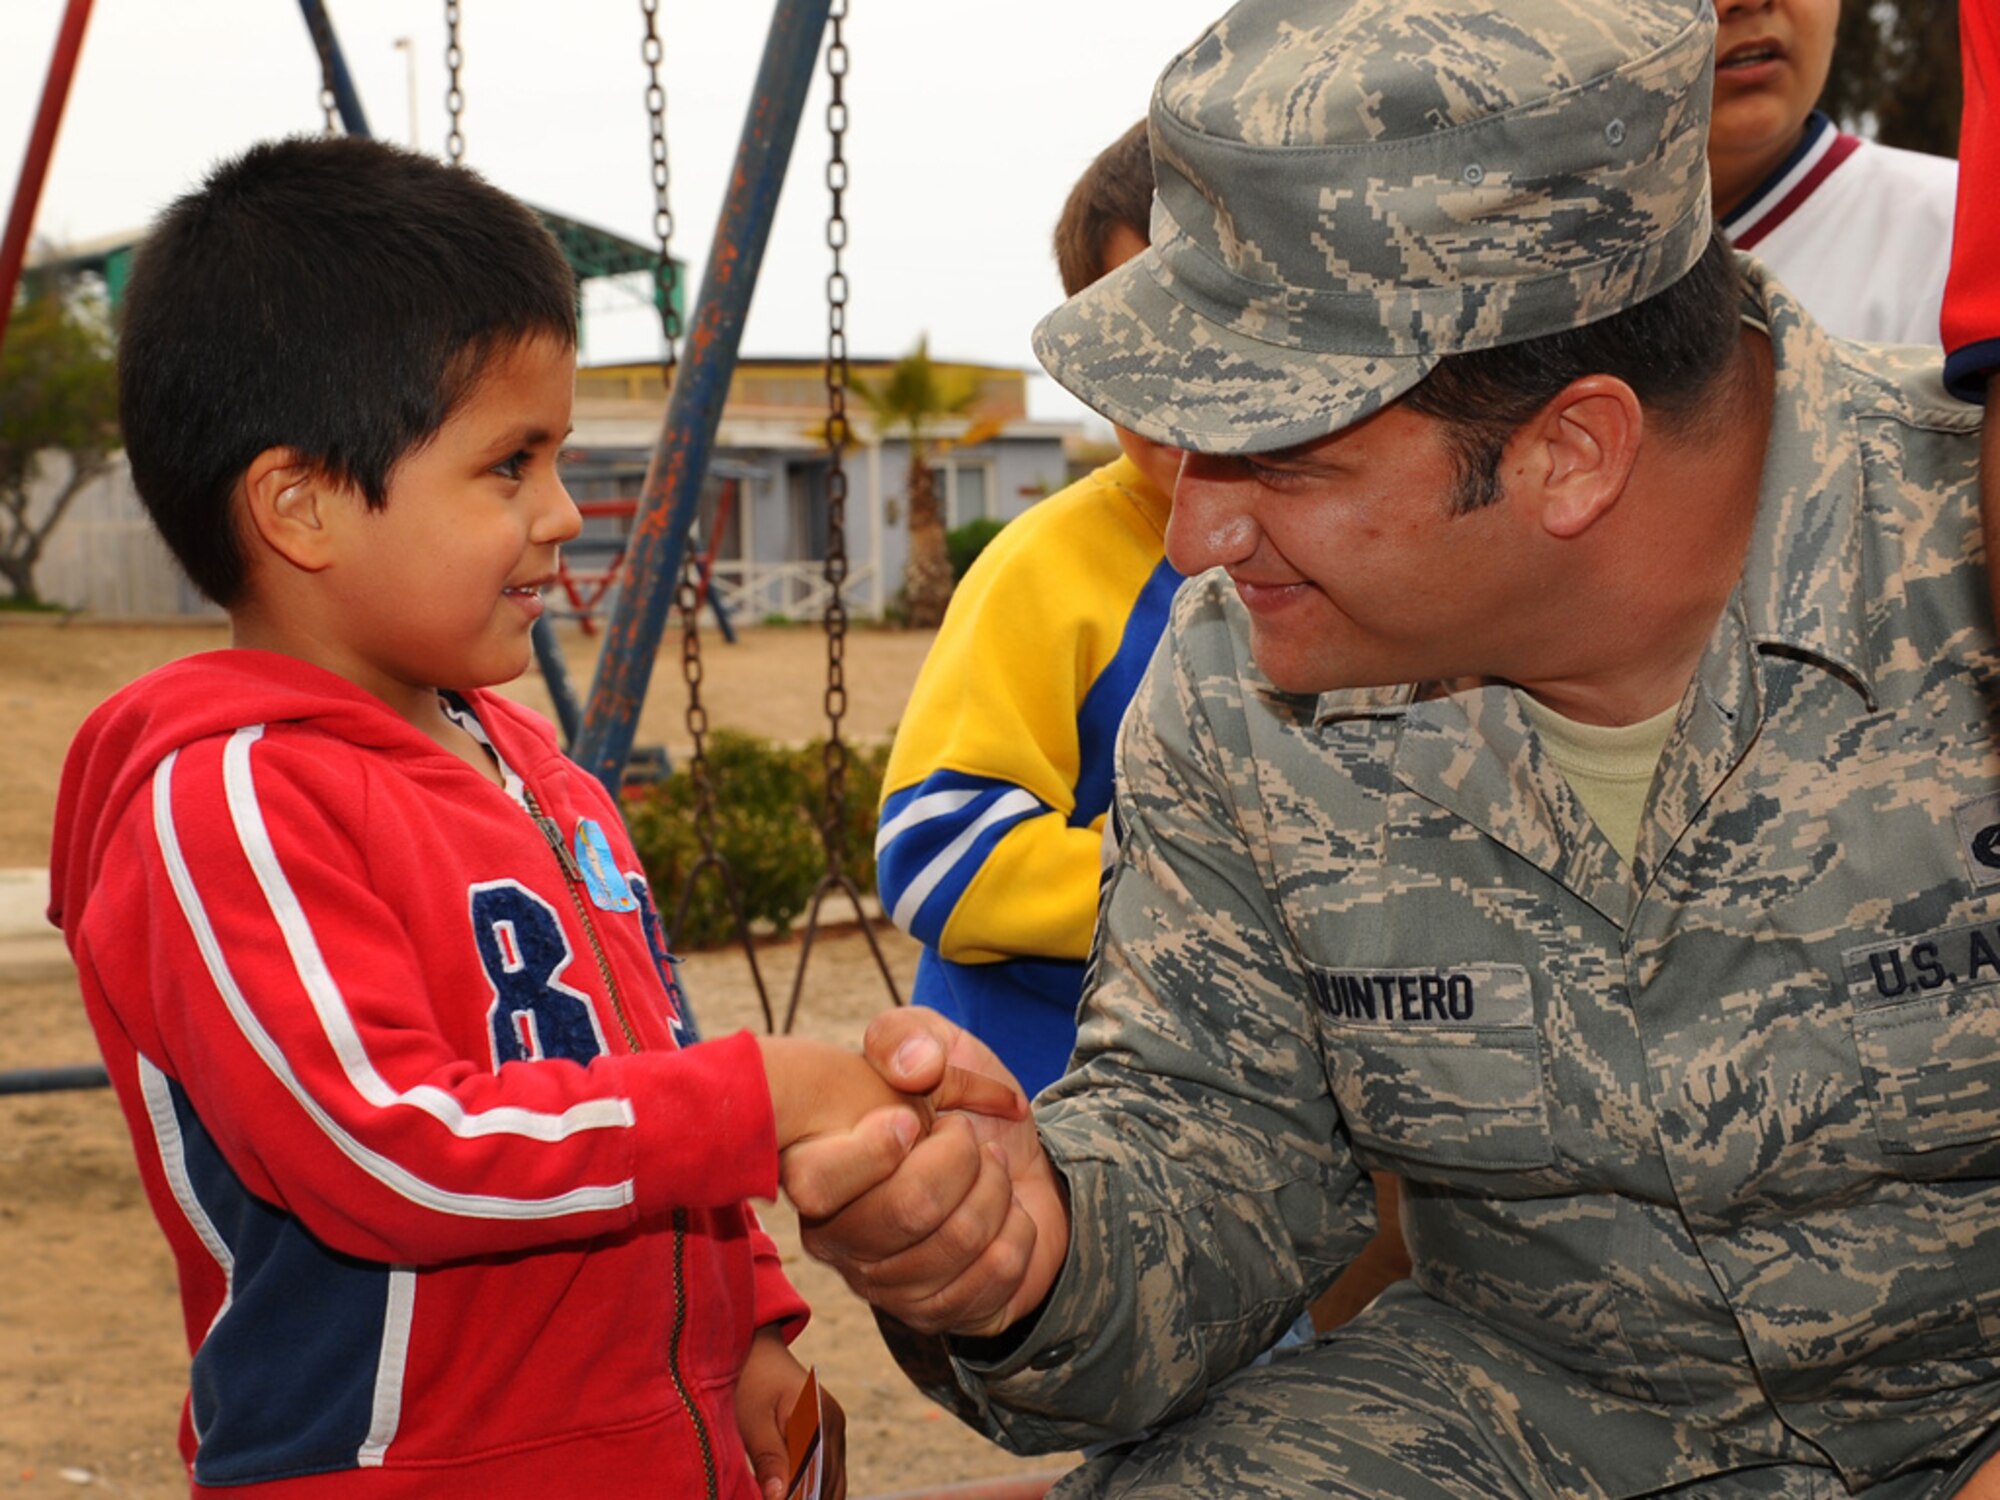 Master Sgt. David Quintero, an aircraft armament systems craftsman, with the 159th Fighter Wing, Louisiana Air National Guard, shakes the hand of child at the Aldeas SOS orphanage in Antofagasta, Chile.  Sergeant Quintero celebrated his own birthday at the center along with more than 40 Airmen from the US, Chilean and Argentine Air Forces who visited the home while taking time off from exercise SALITRE, a five-nation exercise focused on peacekeeping operations.  (U.S. Air Force photo by Master Sgt. Daniel Farrell)